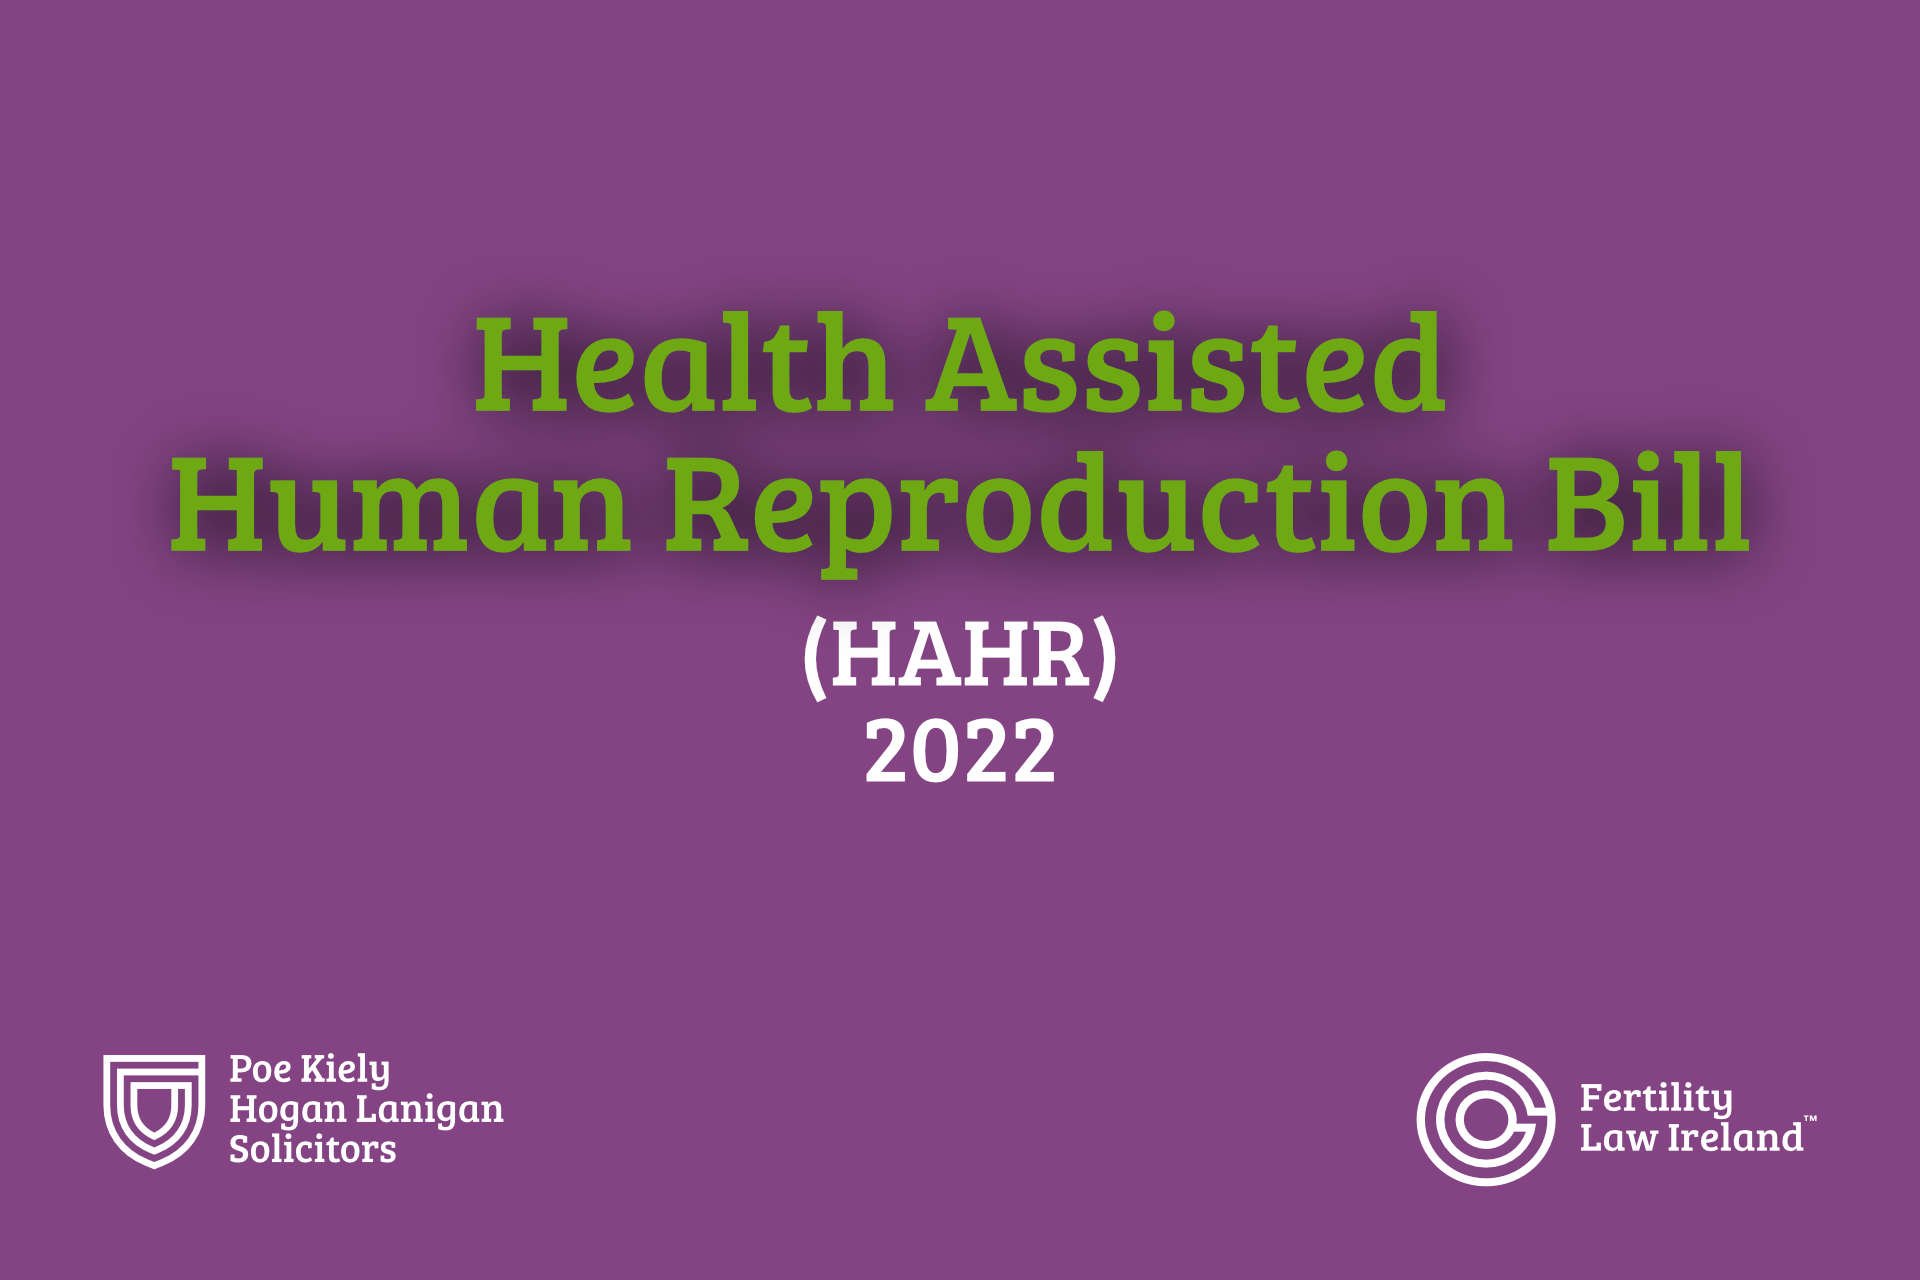 Health Assisted Human Reproduction Bill (“HAHR”) 2022